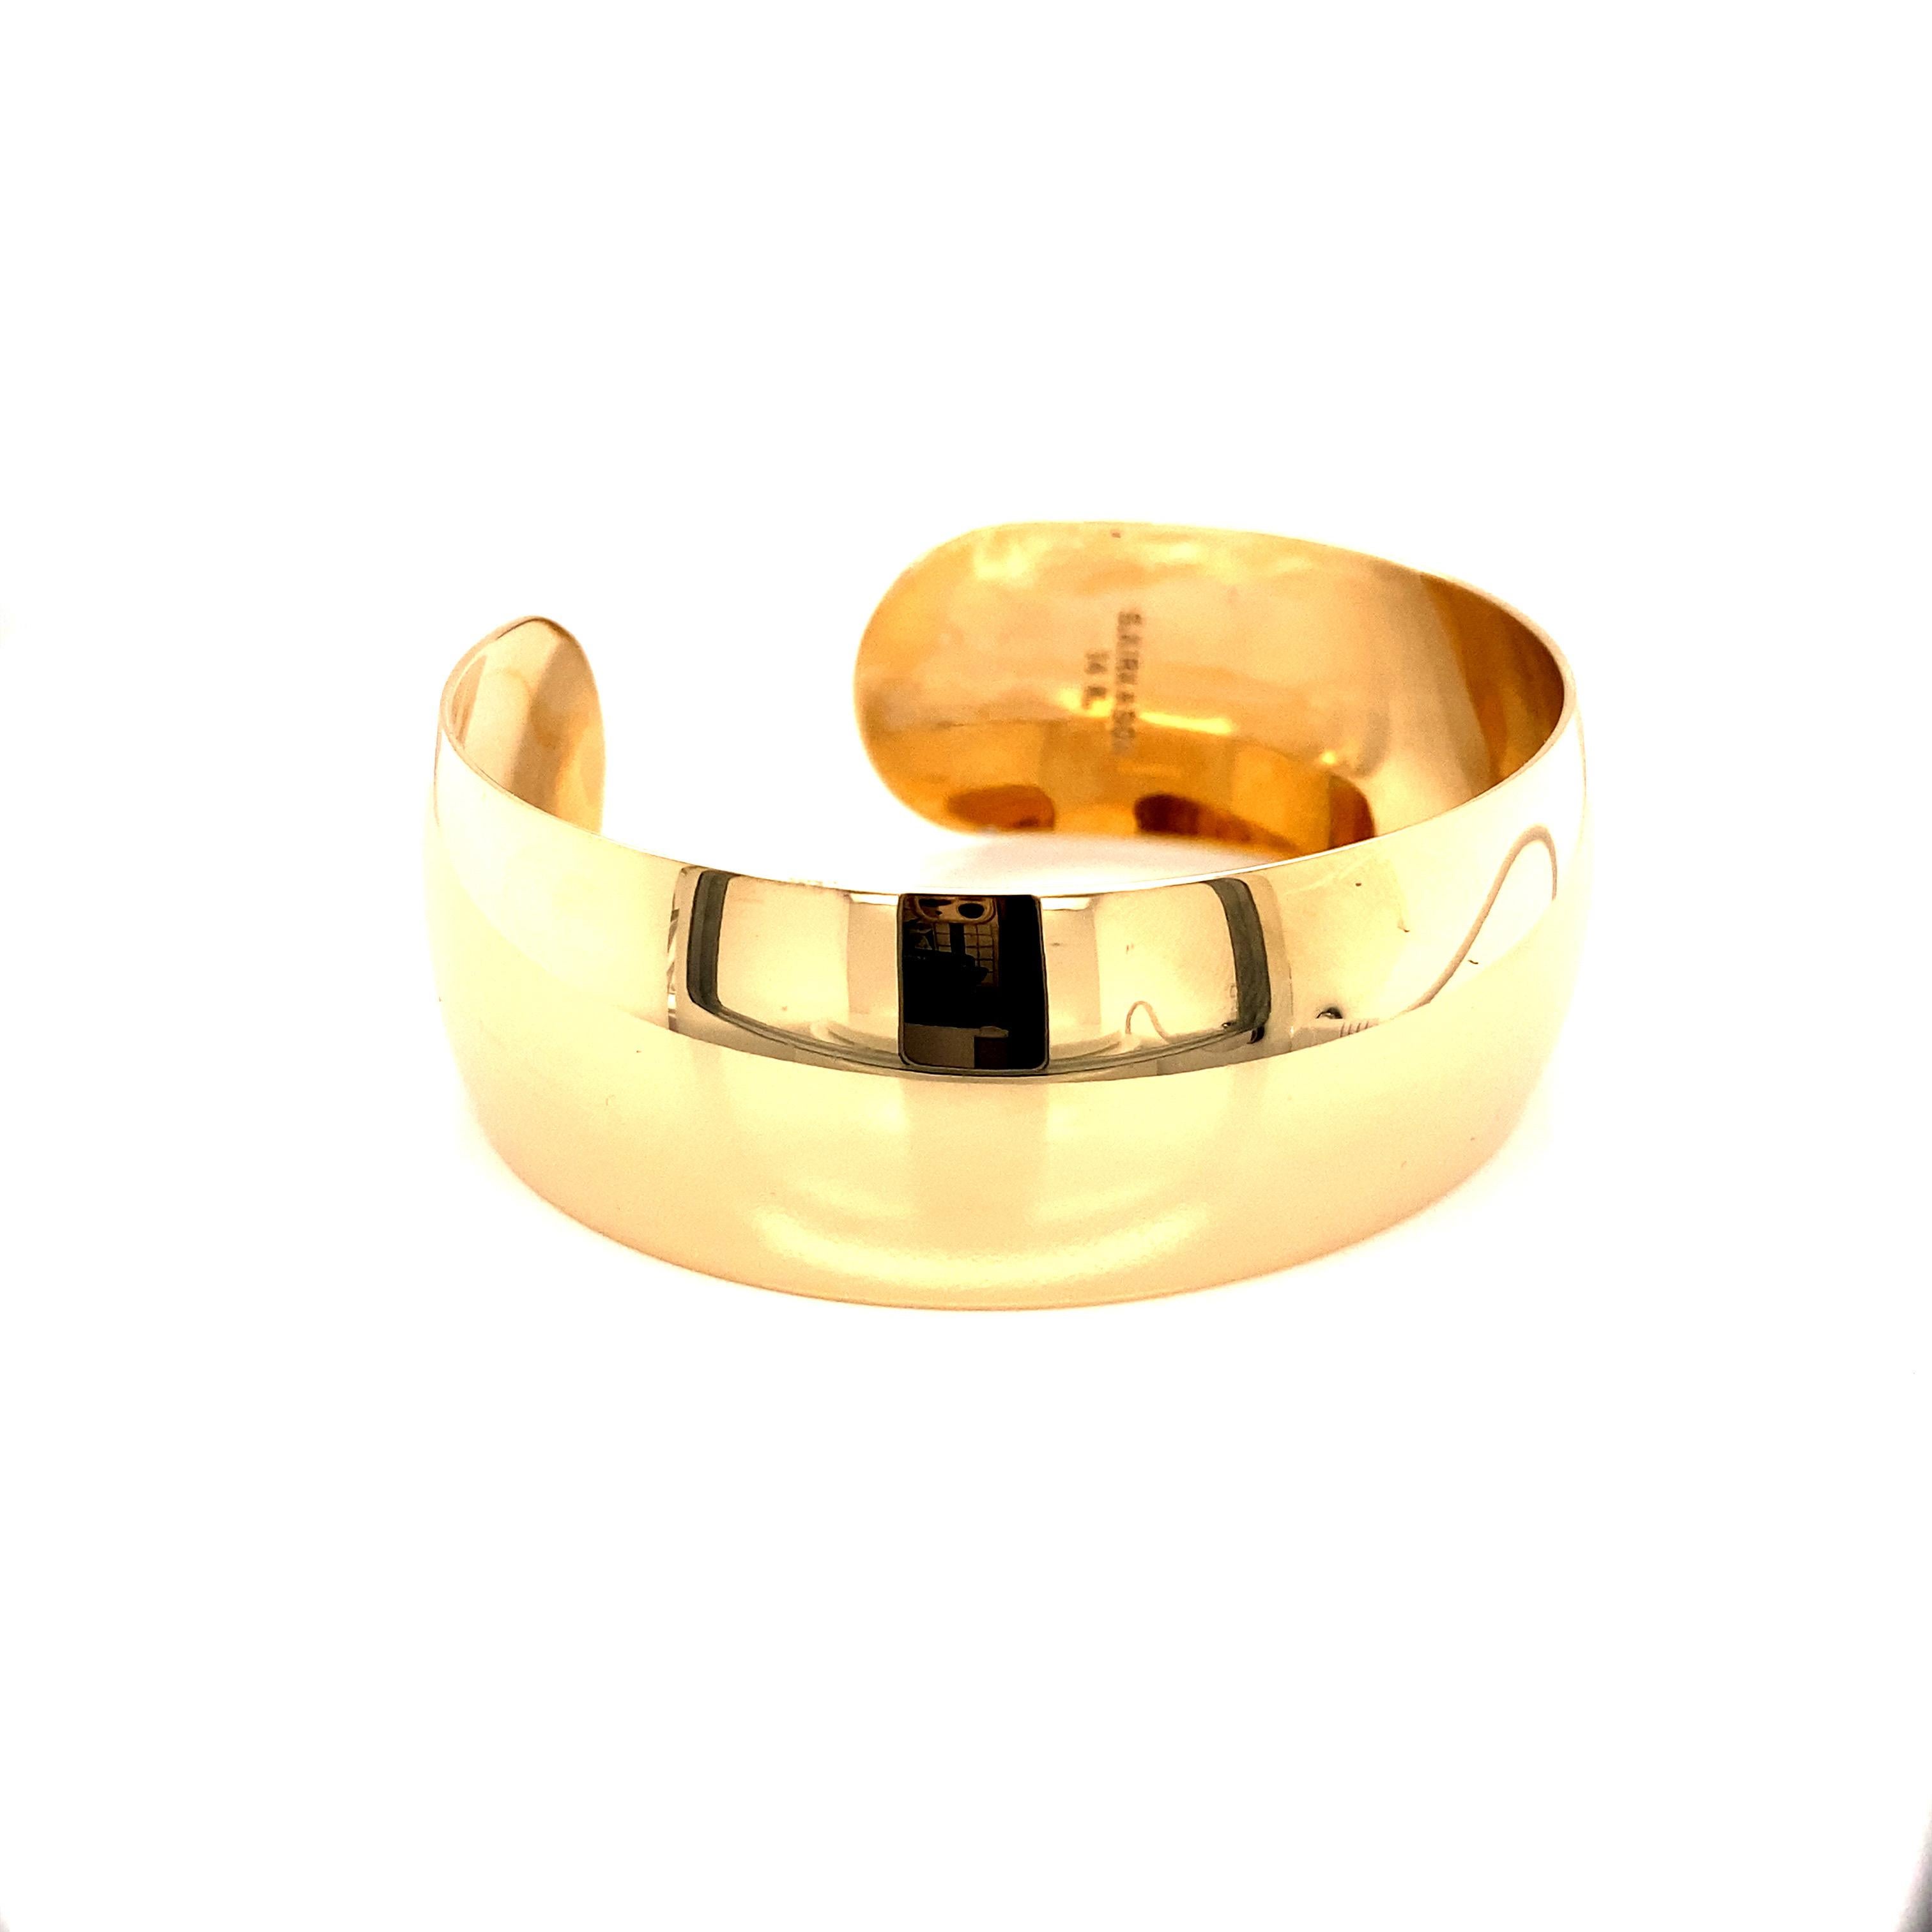 Exuding minimalist glamour, this vintage 14k yellow gold cuff bracelet from the 1990s makes a bold, contemporary statement. The bracelet takes the form of a substantial wide cuff that wraps regally around the wrist. With a substantial width of 0.88